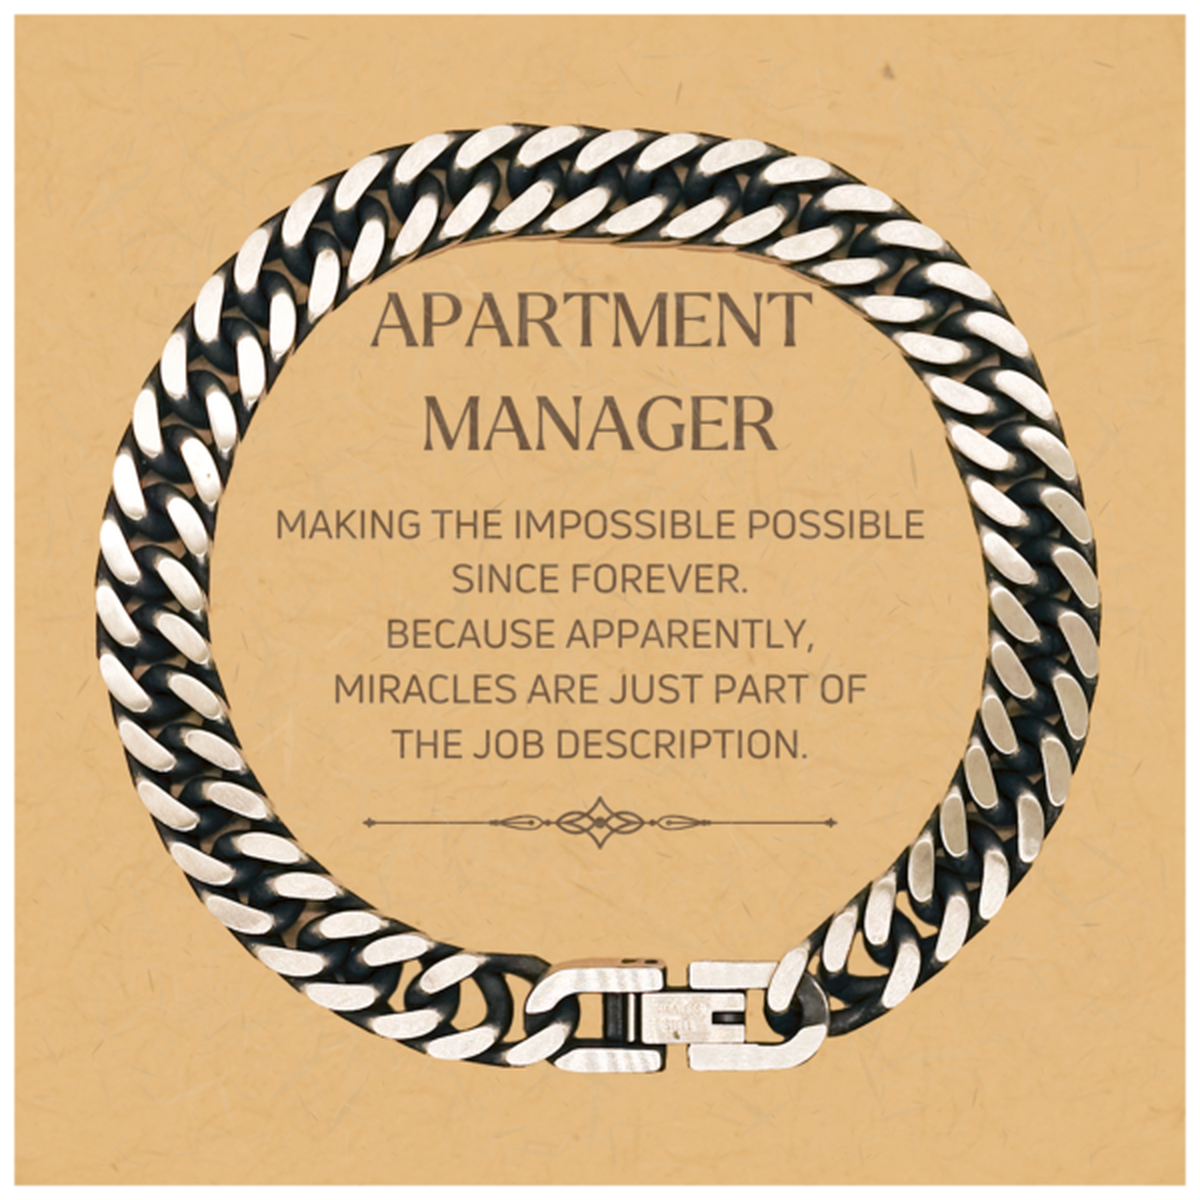 Funny Apartment Manager Gifts, Miracles are just part of the job description, Inspirational Birthday Christmas Cuban Link Chain Bracelet For Apartment Manager, Men, Women, Coworkers, Friends, Boss